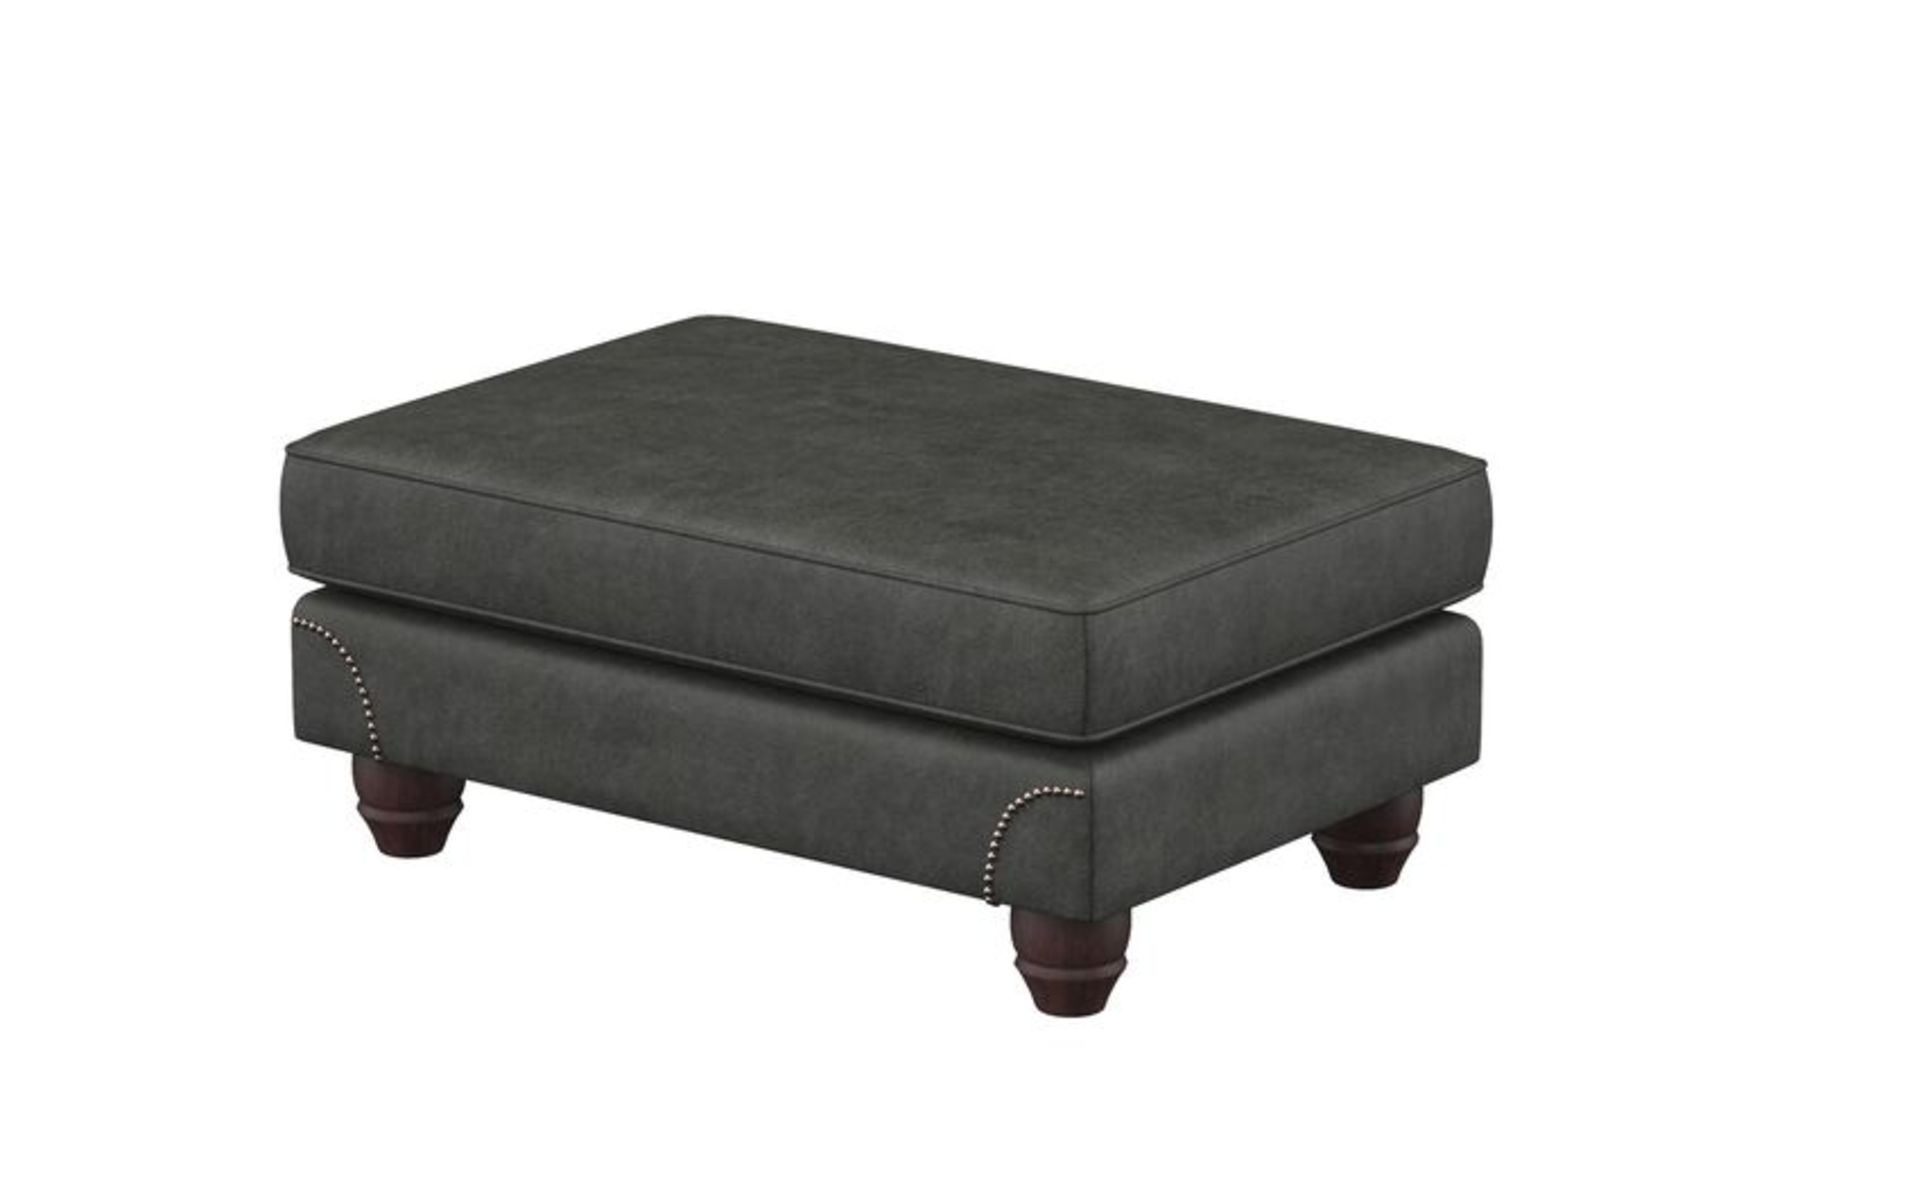 County Standard Footstool Rodeo Black All Over Dark Foam RRP 280County Standard FootstoolIntroducing